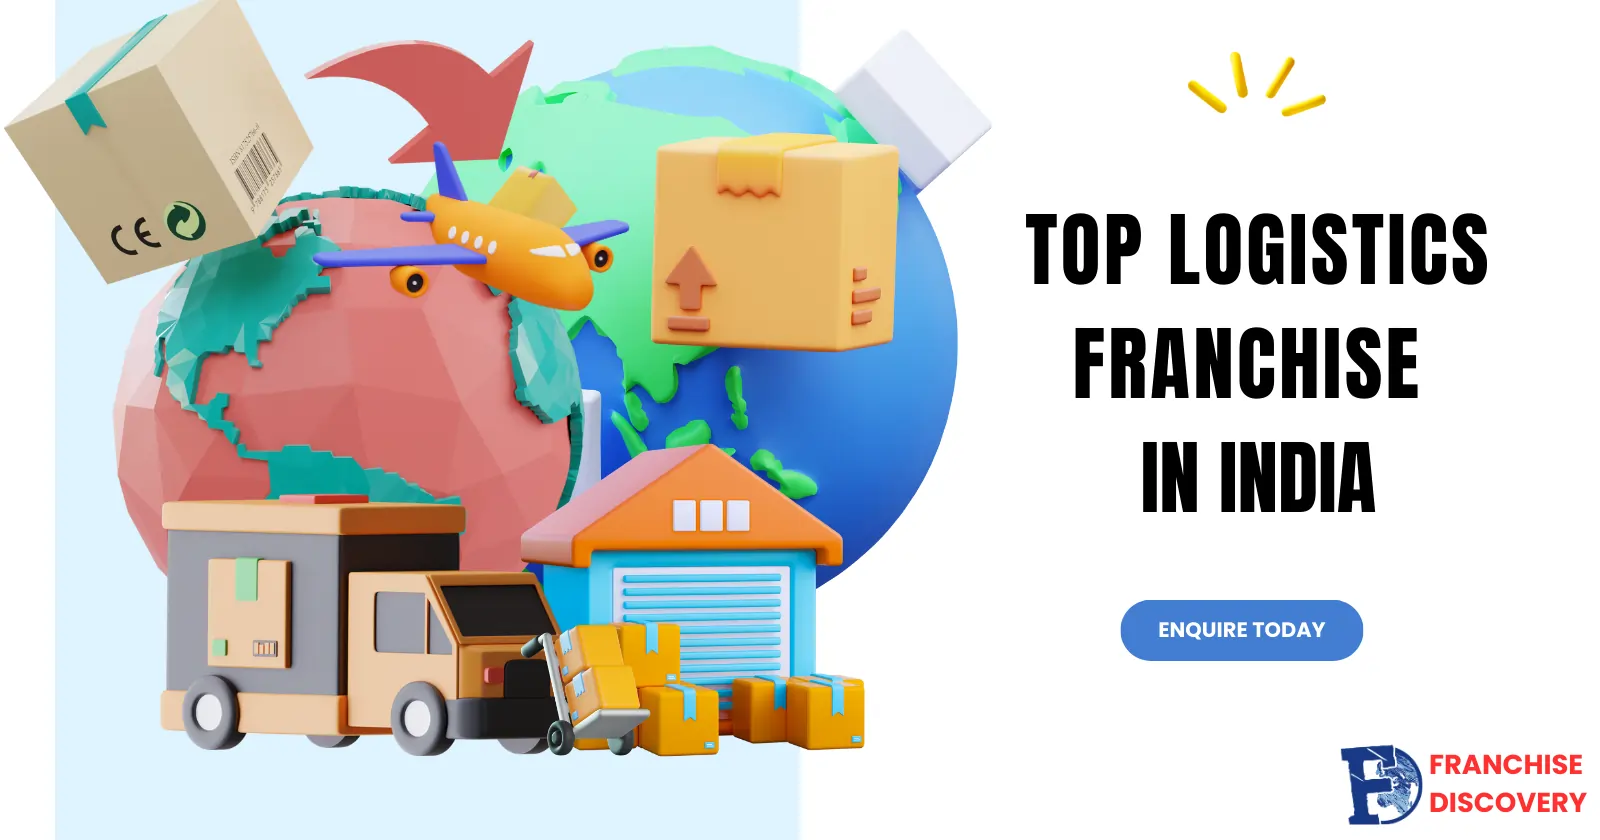 Top Logistics Franchise Options Under 10 Lakhs in India